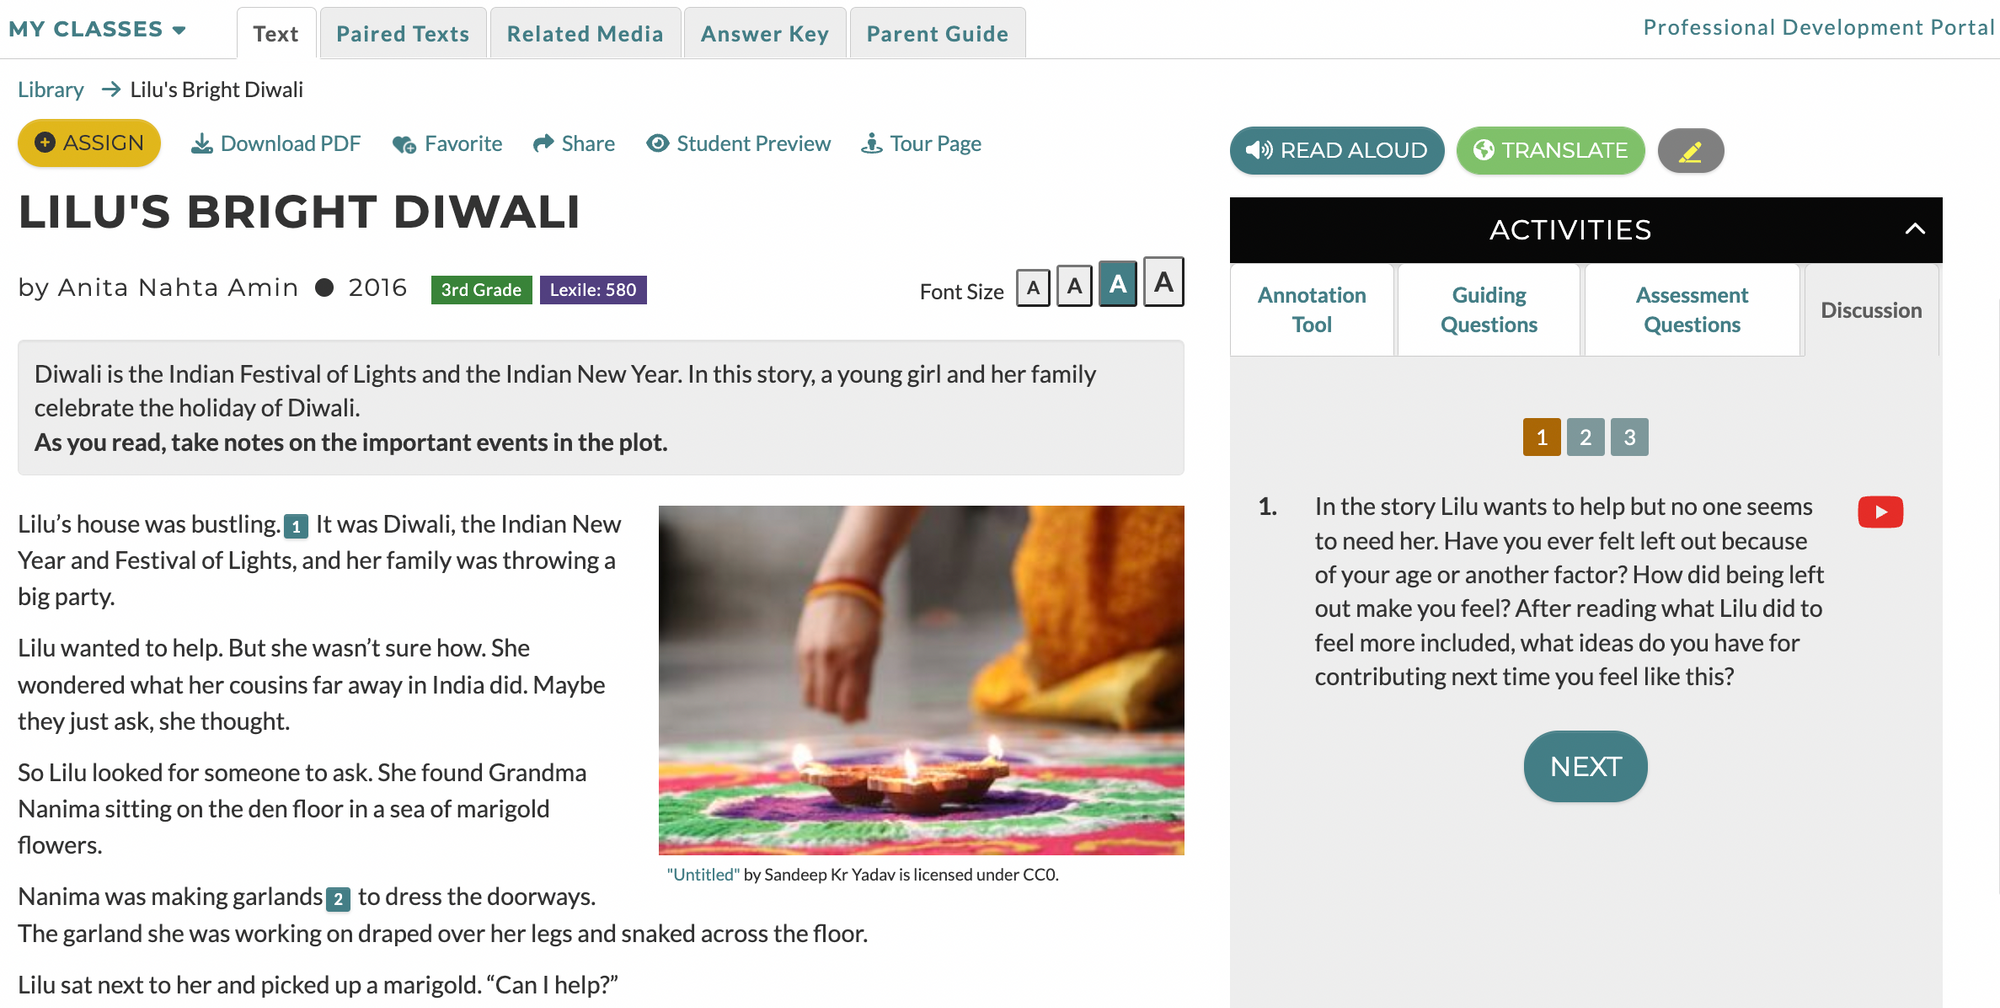 Screenshot of Discussion Question 1 for CommonLit text "Lilu's Bright Diwali"